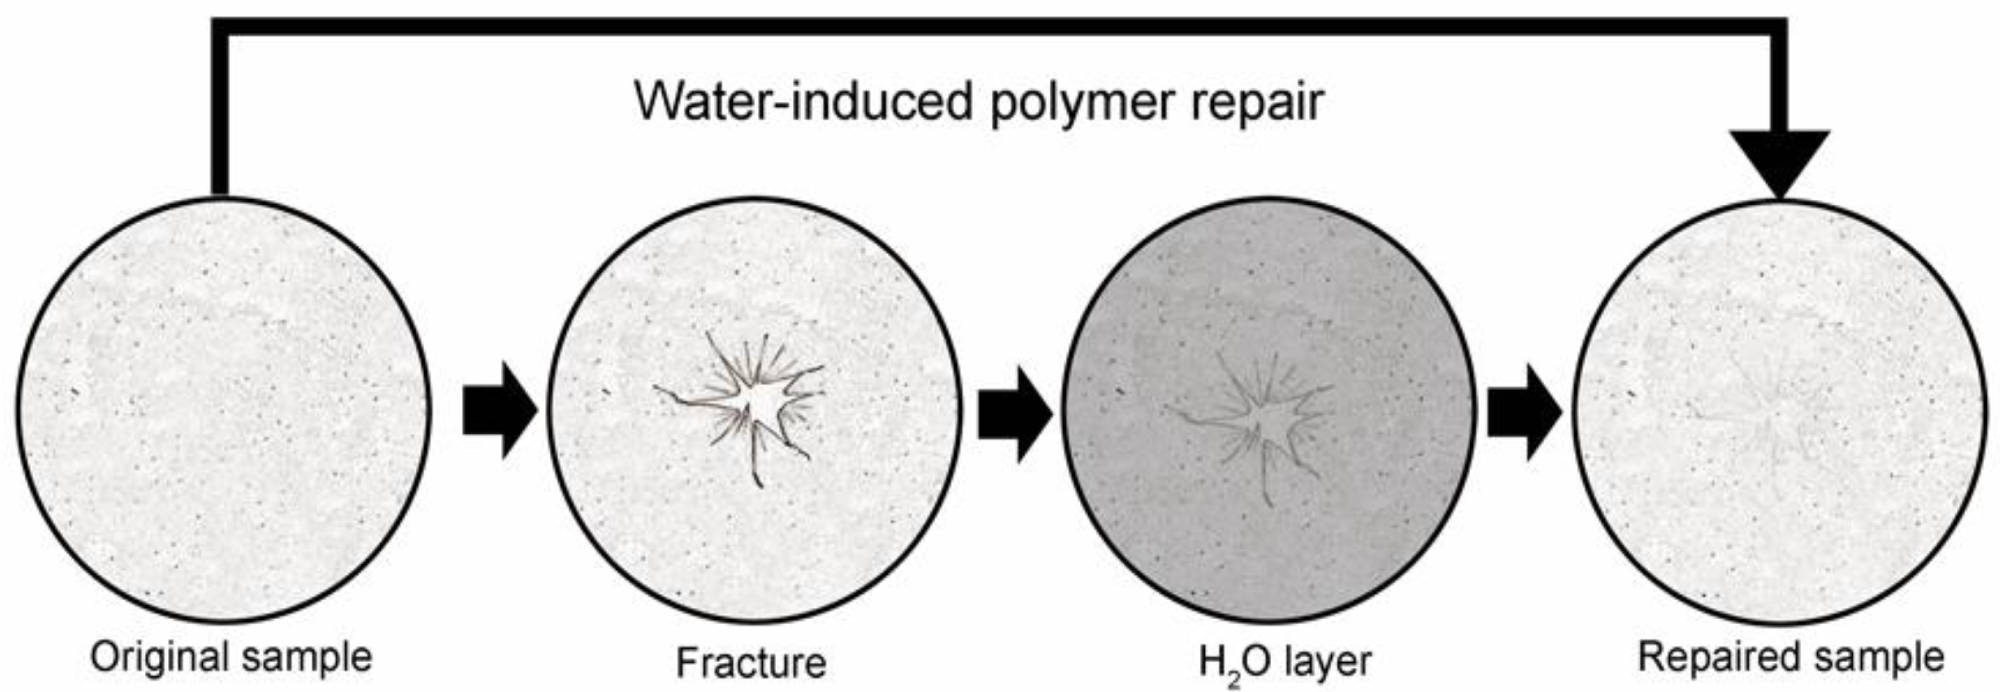 Schematic of water-induced repair of fractured pectin films. The glass phase pectin film is fractured using a controlled uniaxial load with a 5 mm stainless steel probe (2 mm/s). The fractured film is placed on a thin layer of distilled water (1.6 to 1.8 mm) for 8 h at 25 °C followed by optical and mechanical analysis of the repaired films.